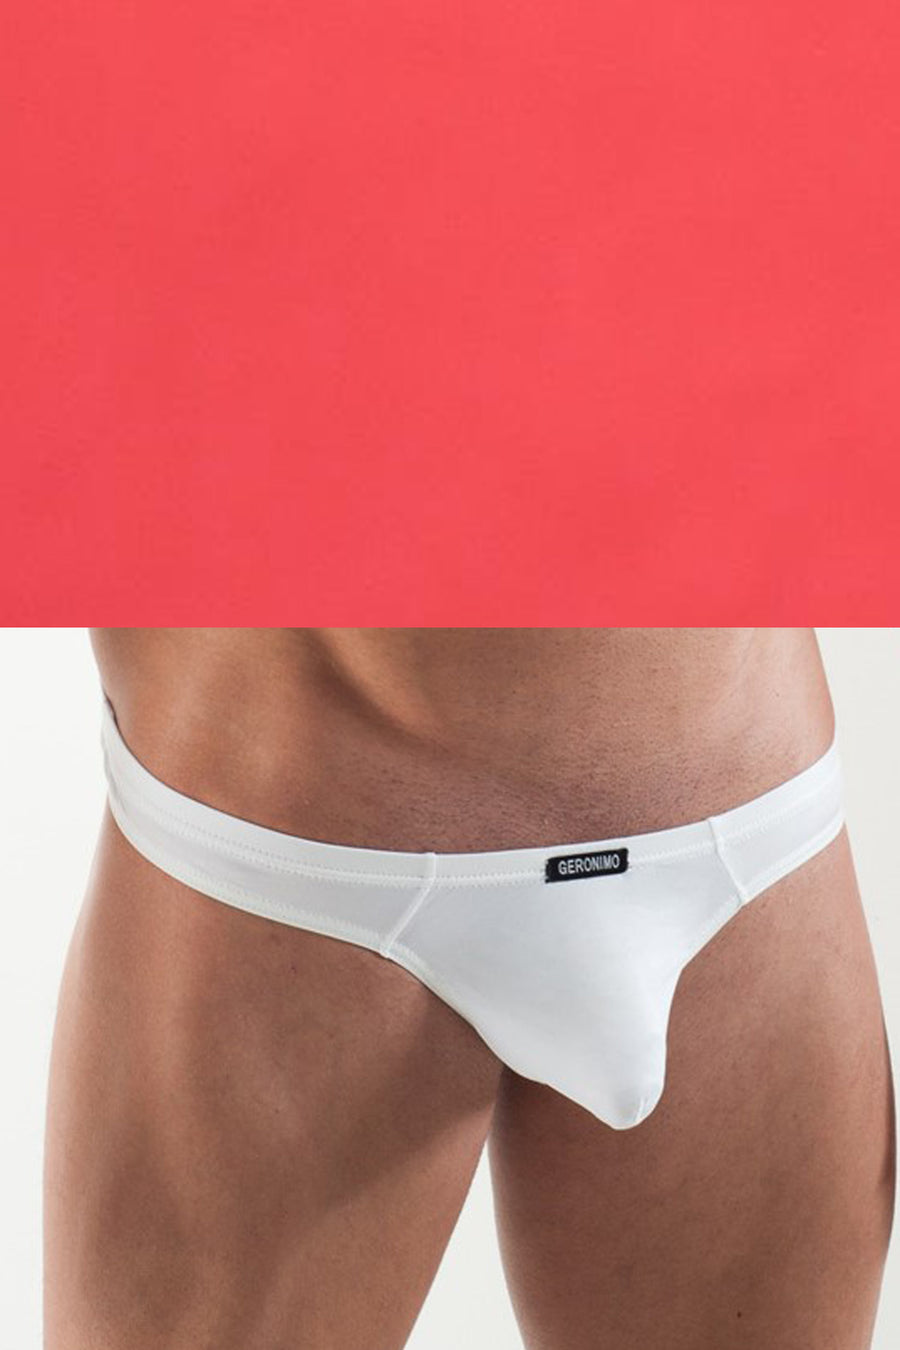 Geronimo Mens Pouch Thong G-string Underwear